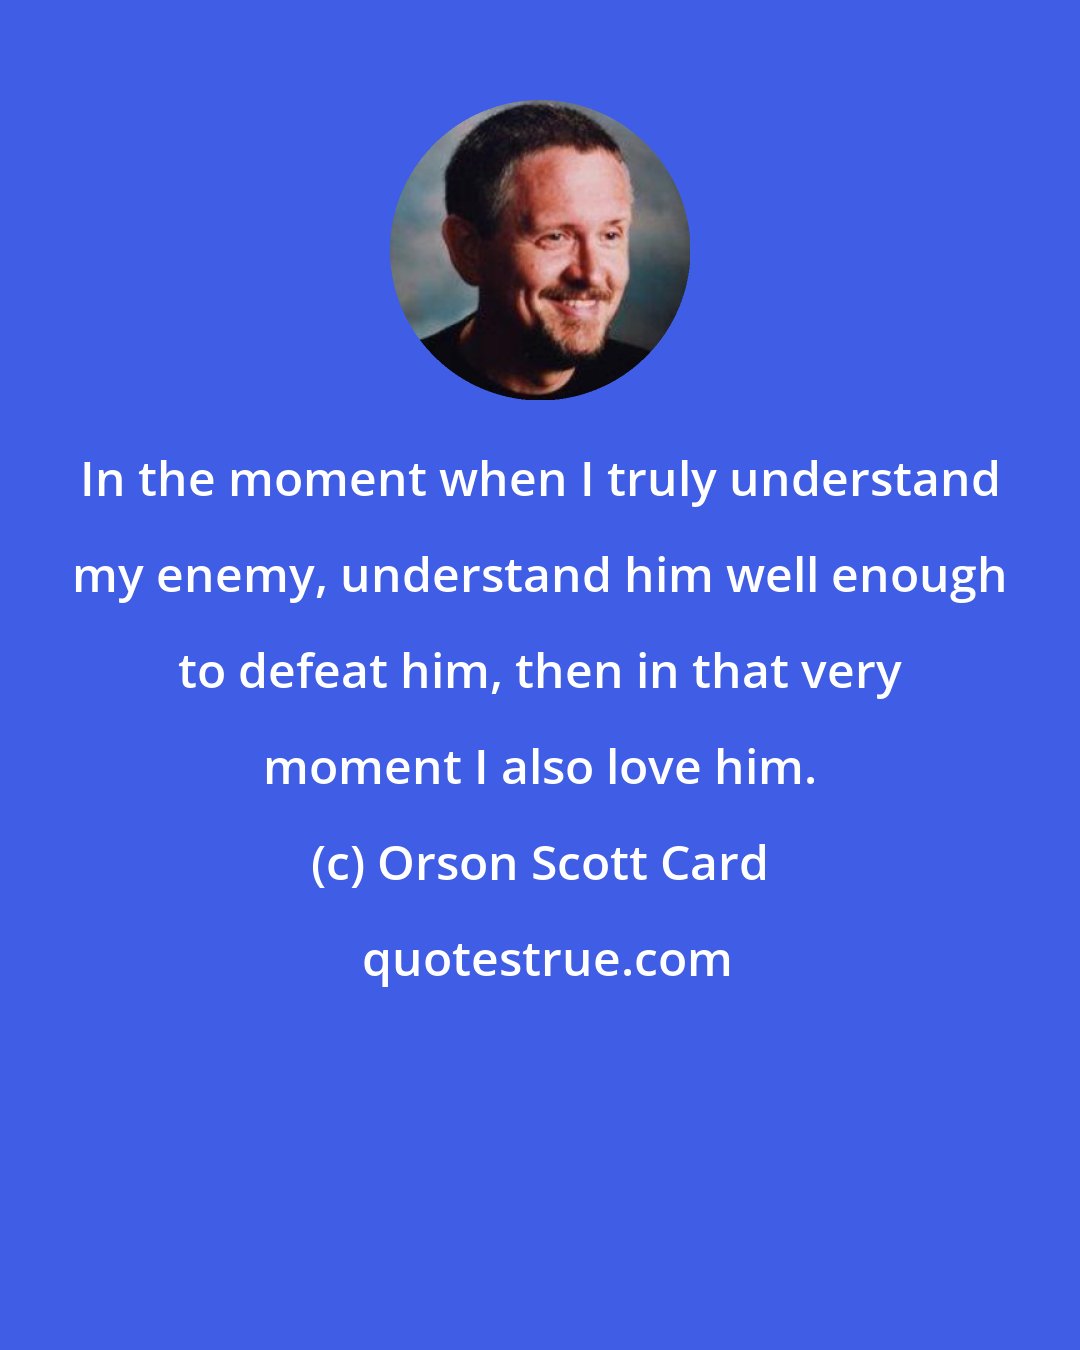 Orson Scott Card: In the moment when I truly understand my enemy, understand him well enough to defeat him, then in that very moment I also love him.